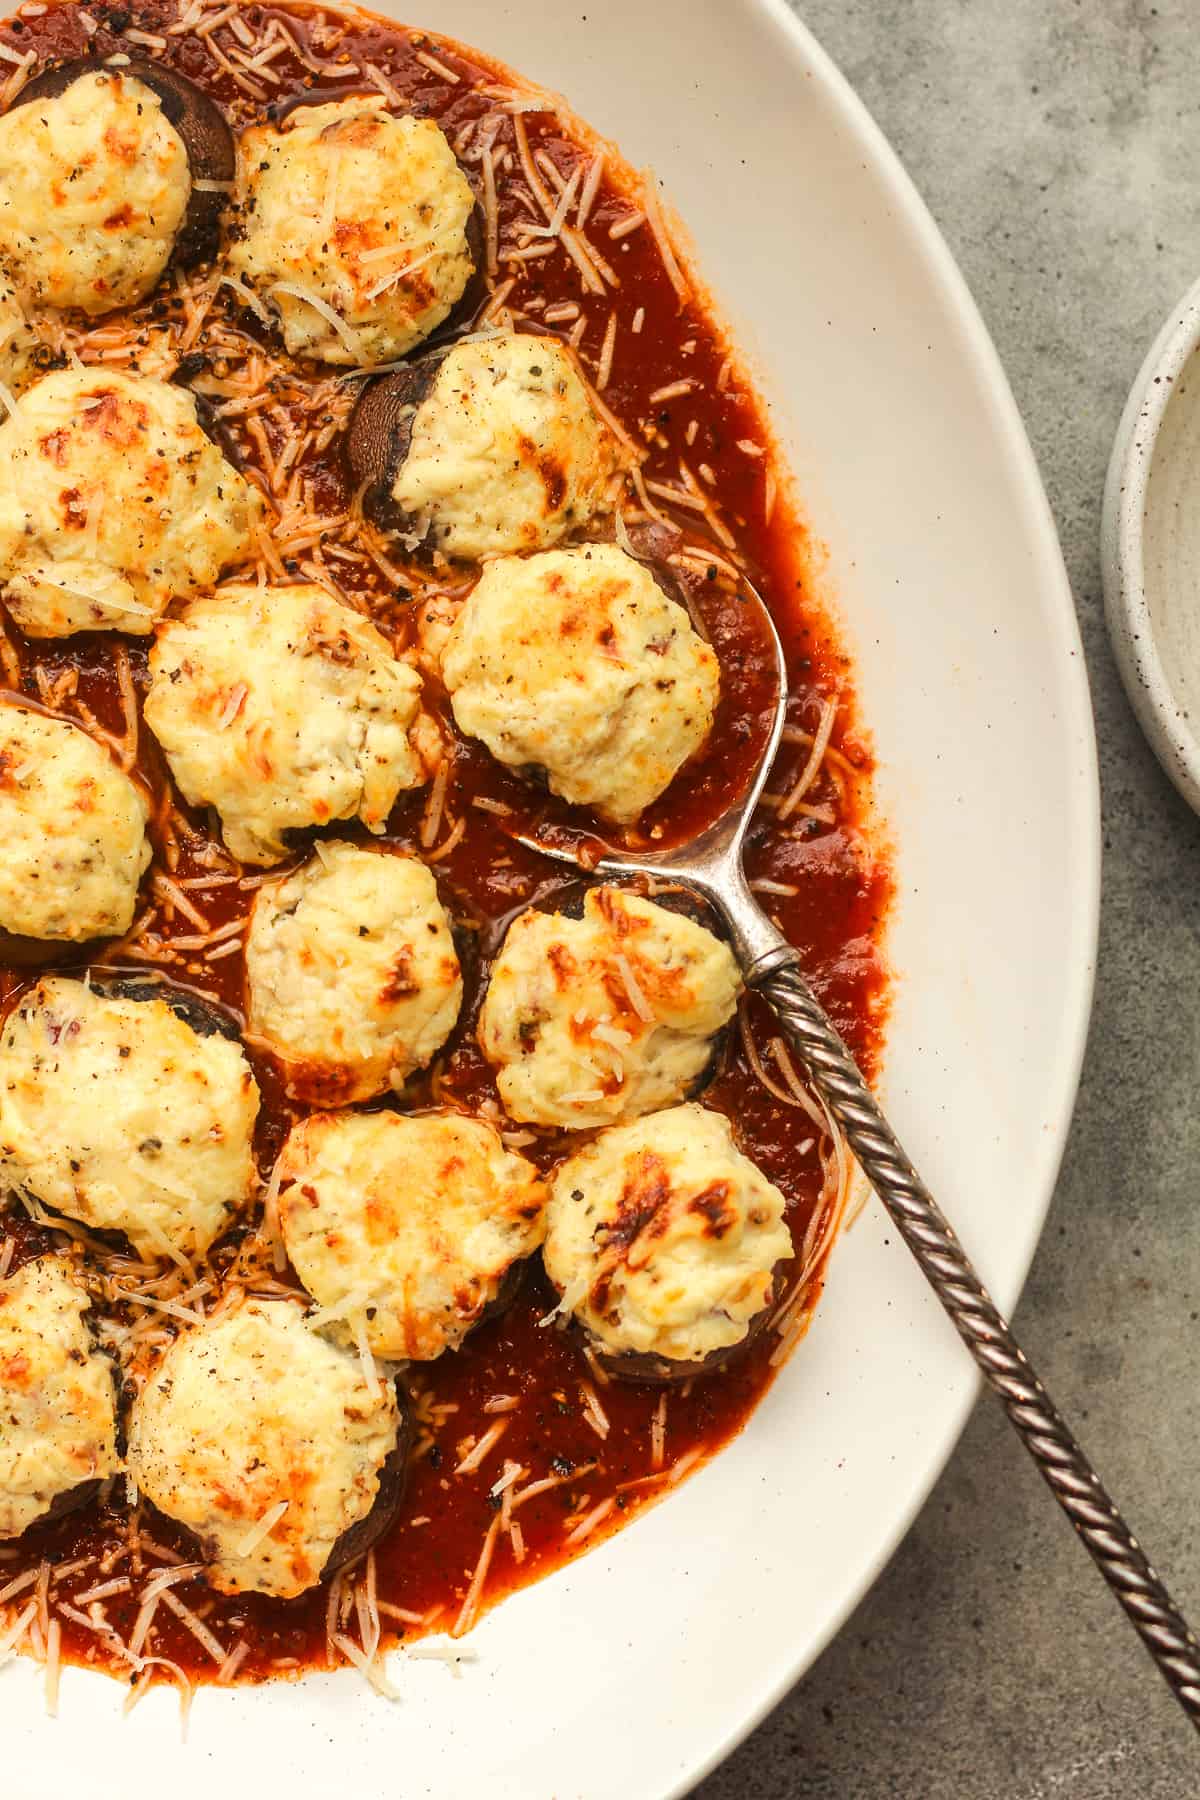 Overhead view of a platter of ricotta stuffed mushrooms over red sauce with a spoon.